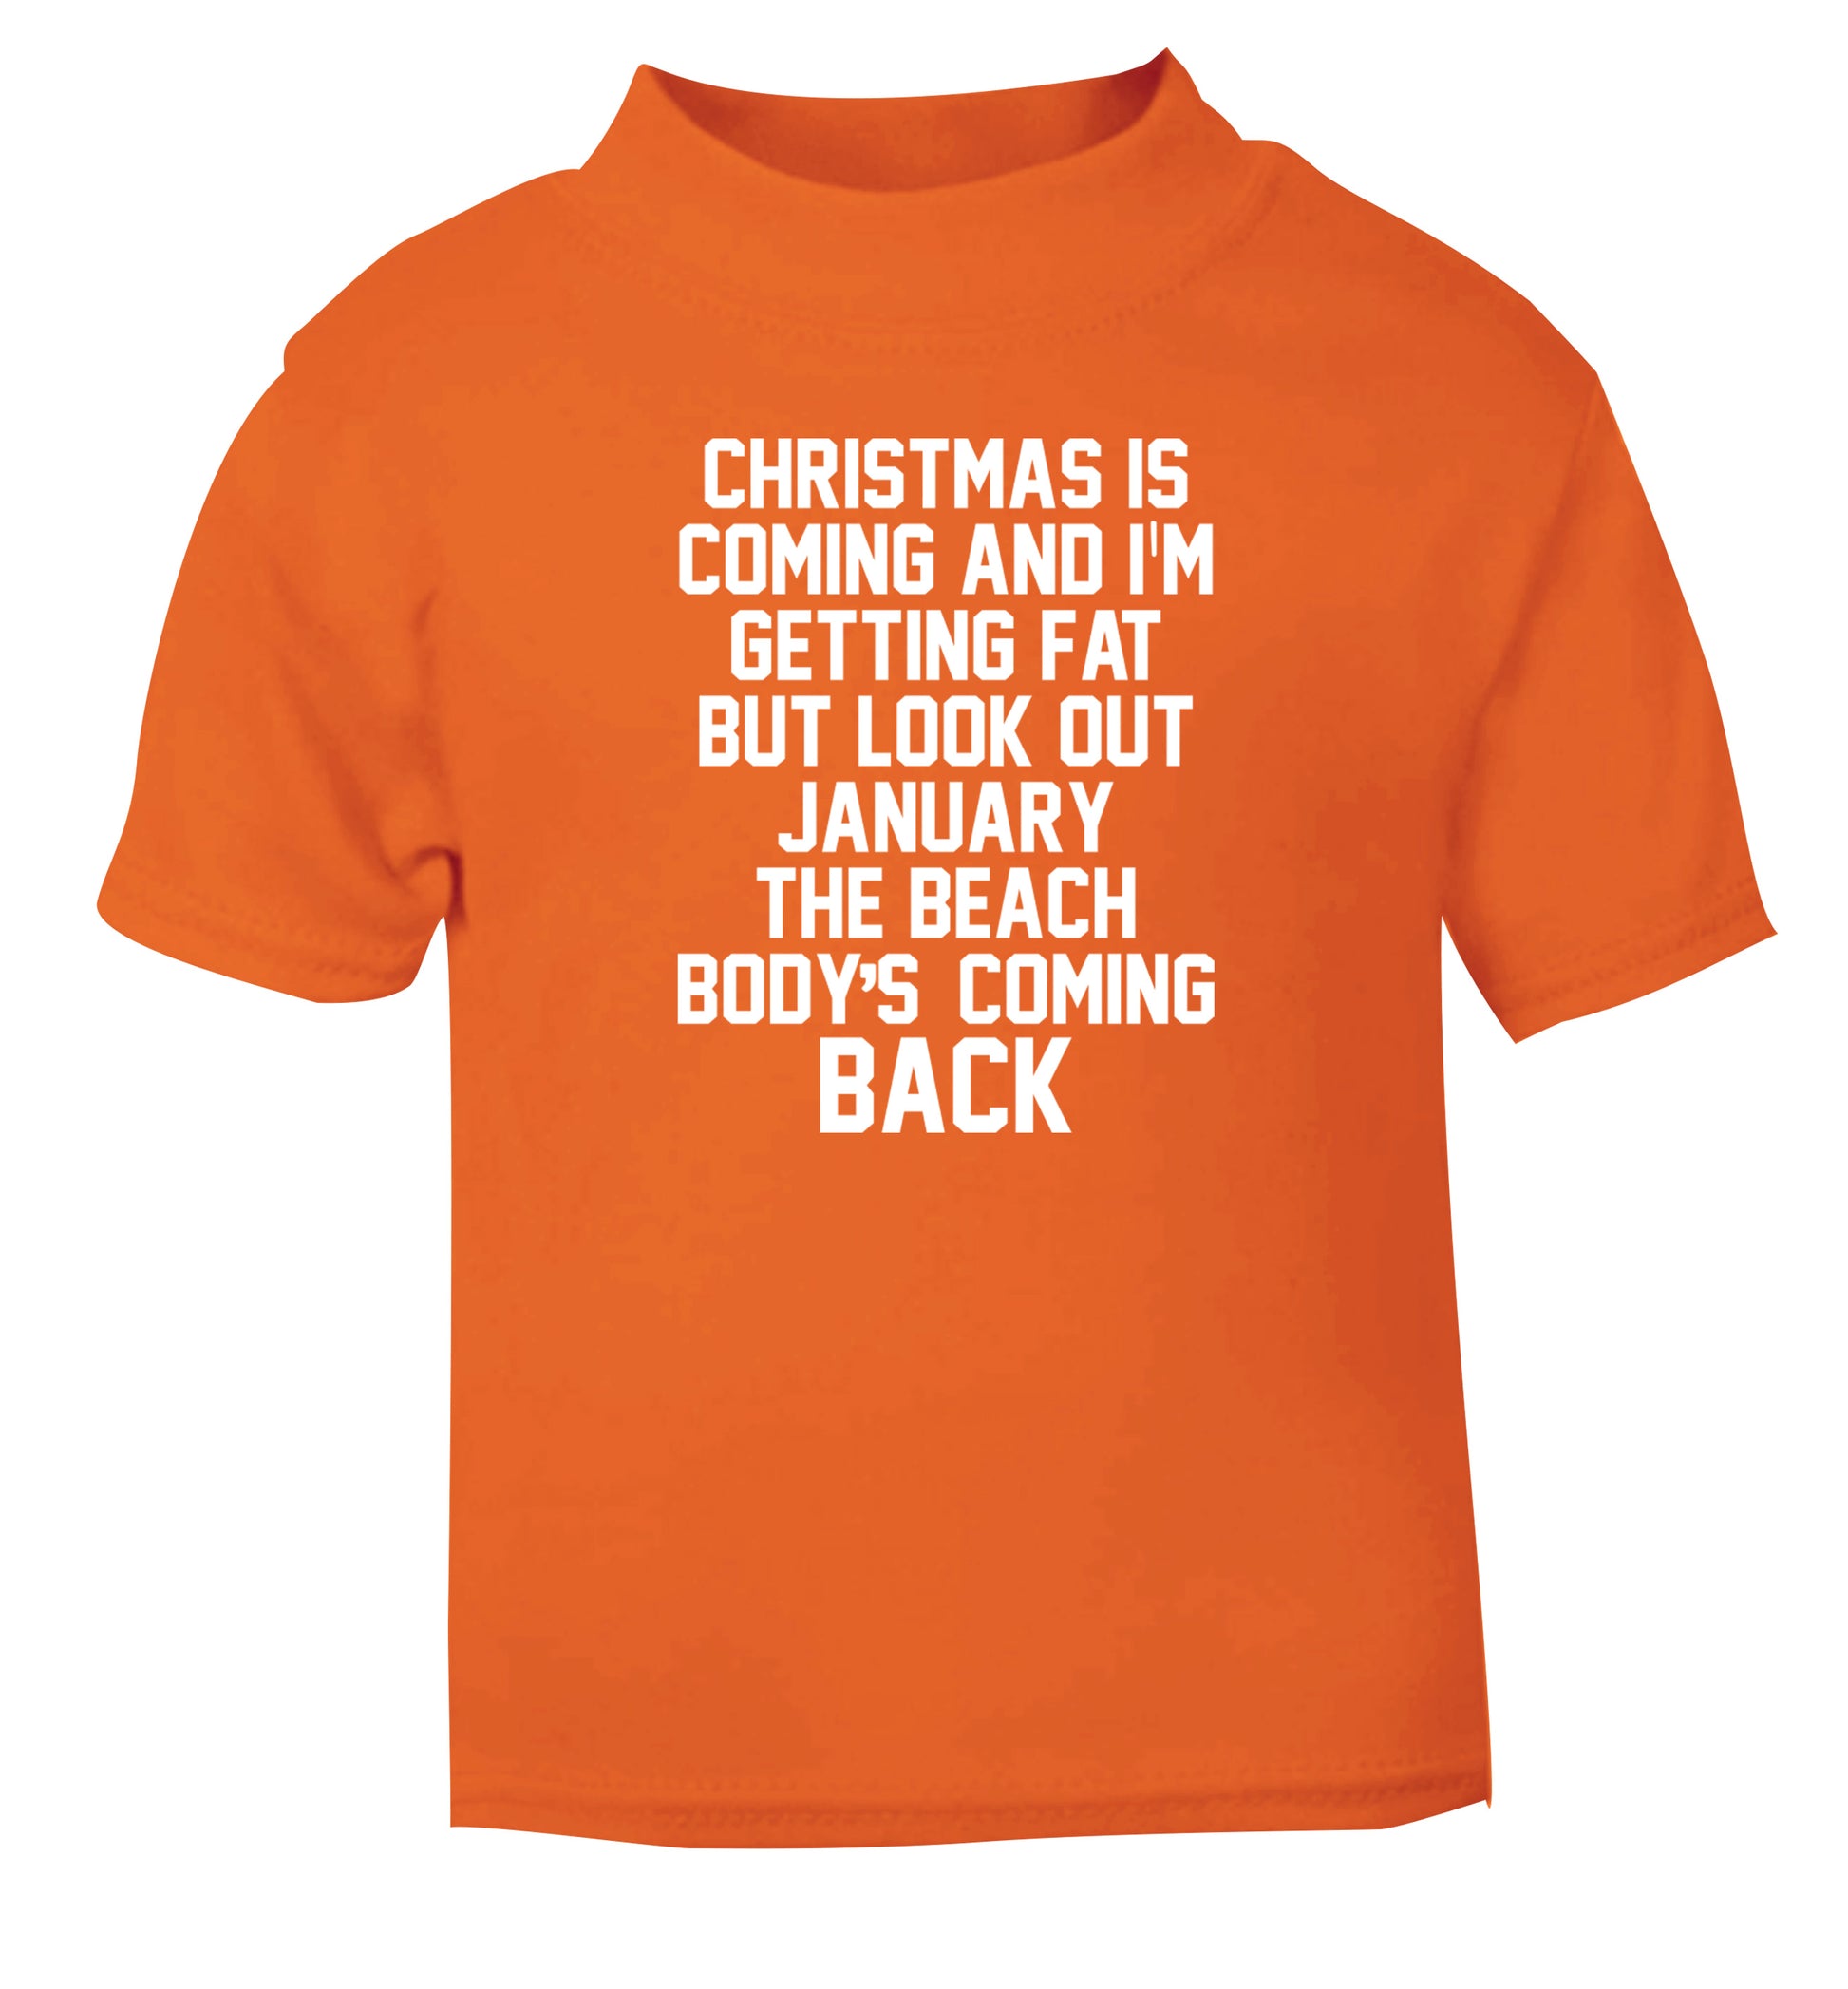 Christmas is coming and I'm getting fat but look out January the beach body's coming back! orange Baby Toddler Tshirt 2 Years